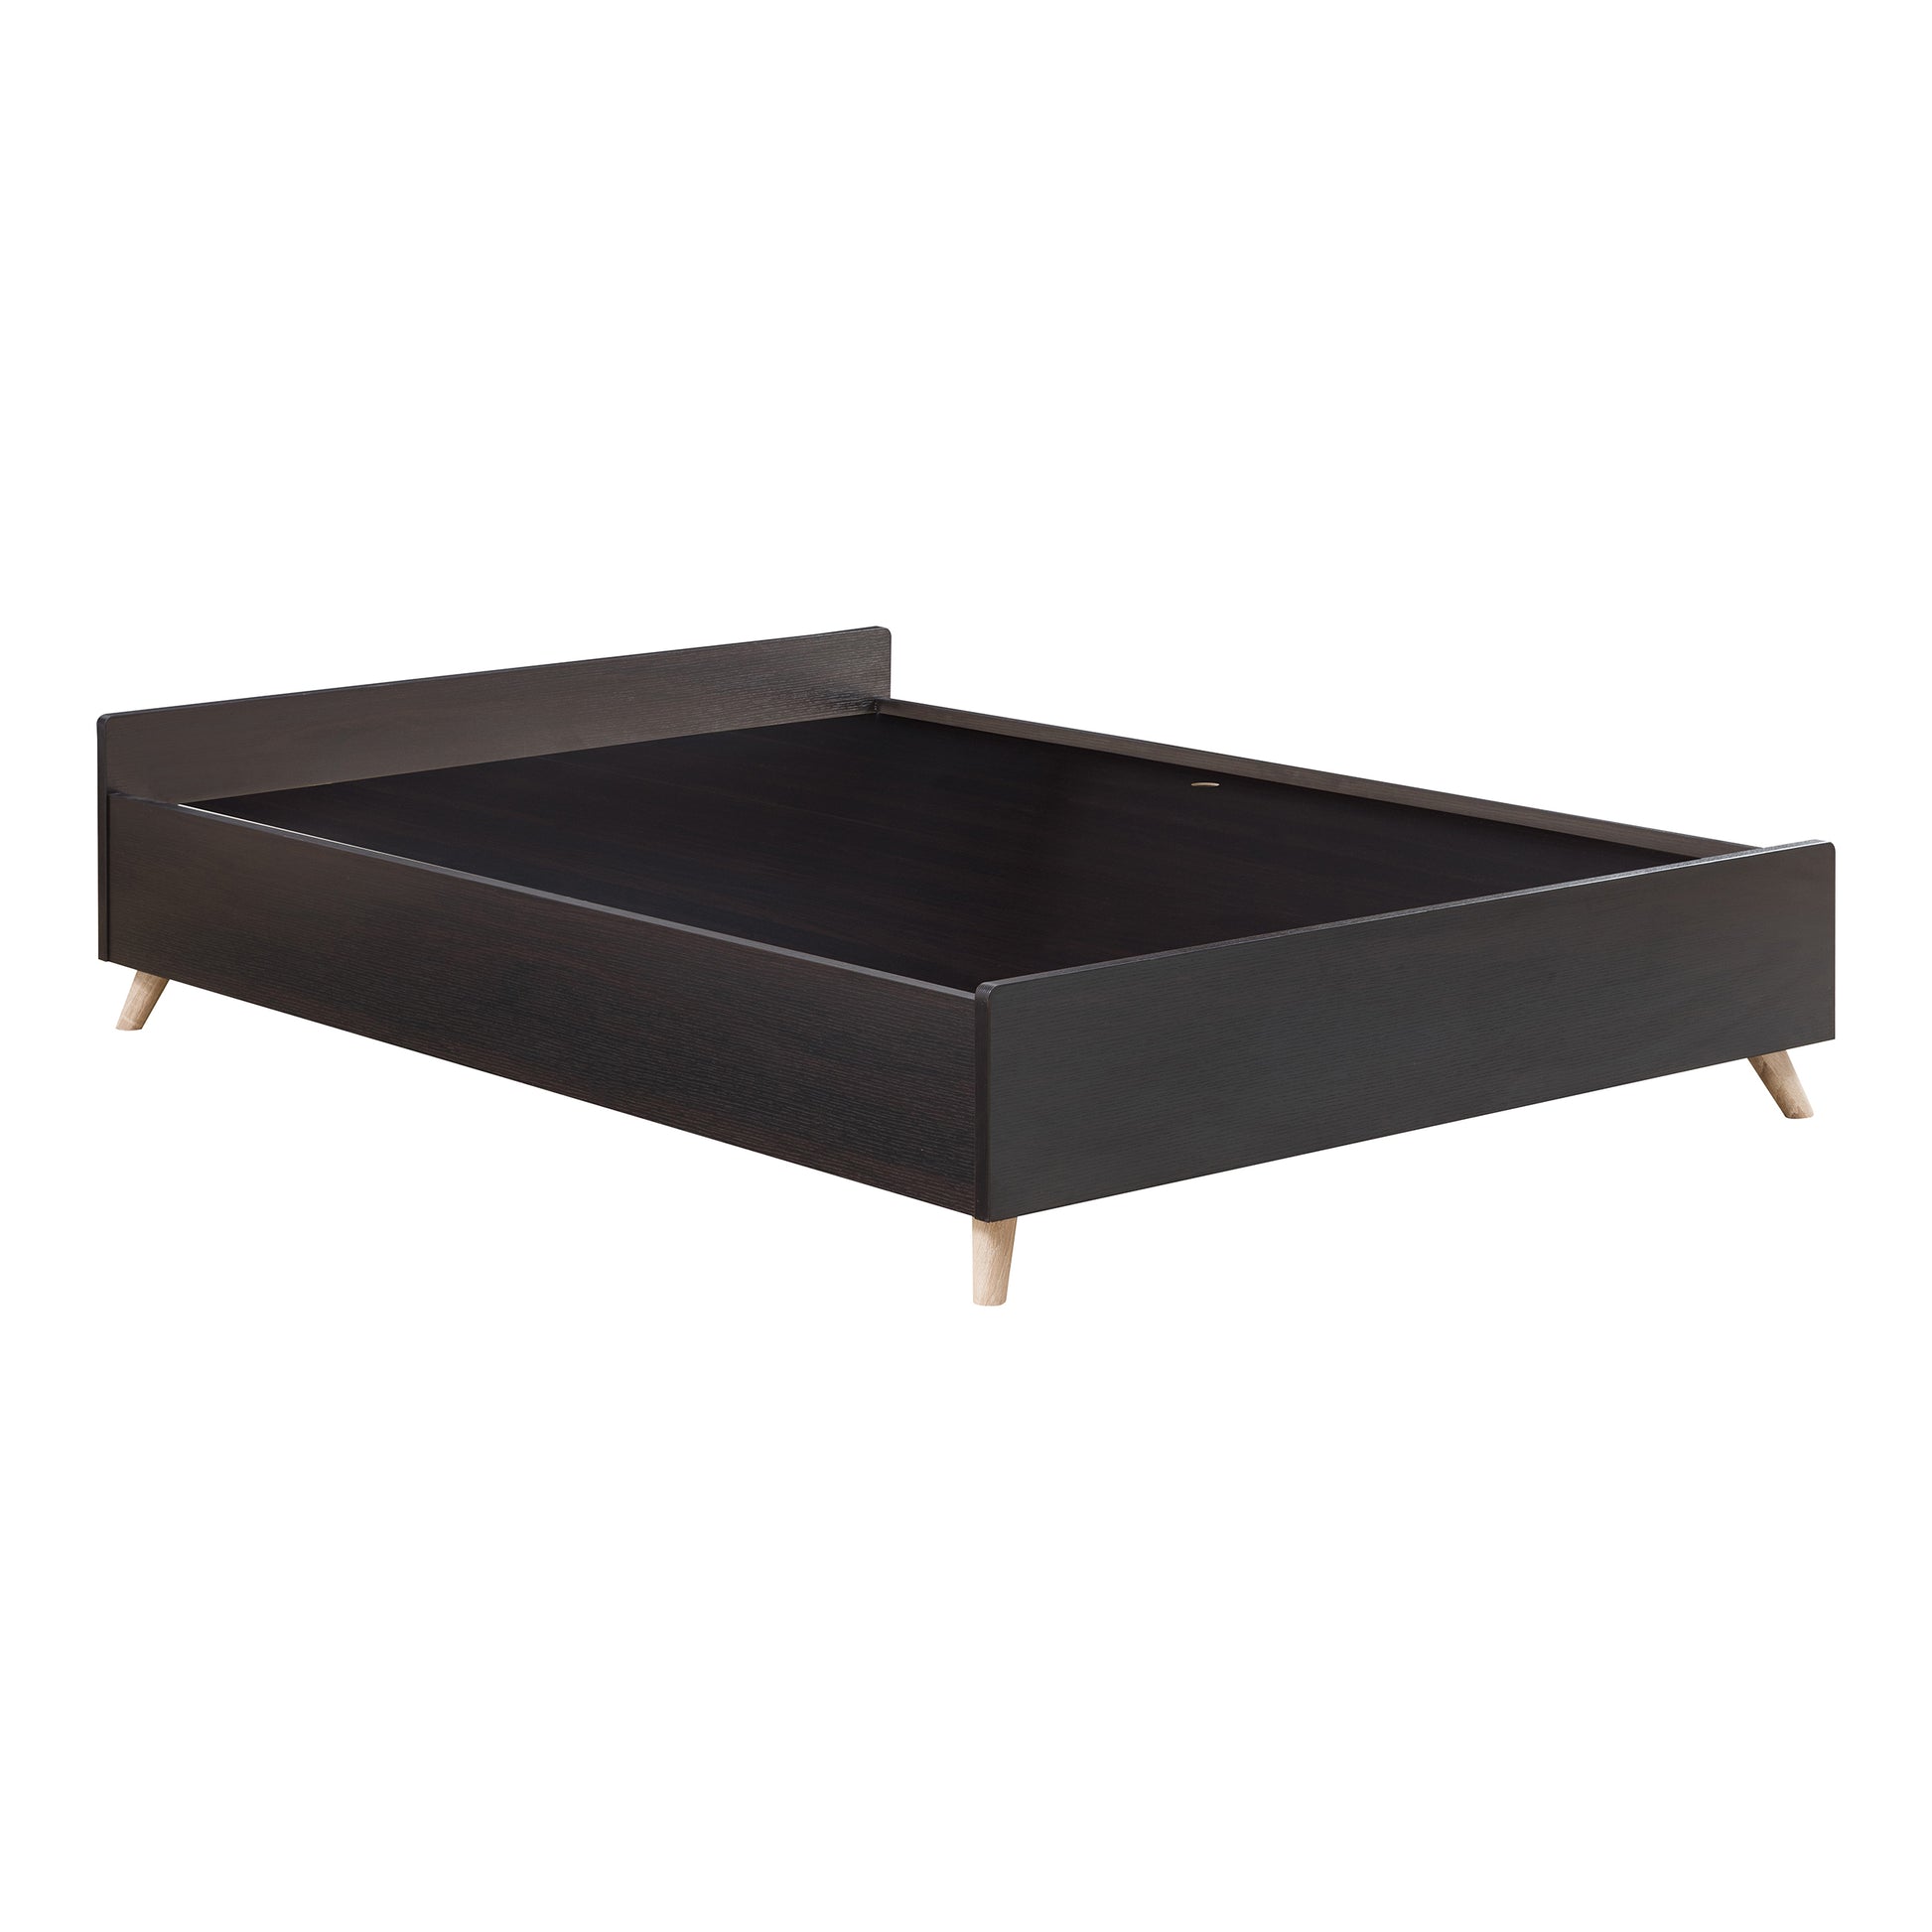 Right angled back/side view of a contemporary cappuccino three-drawer queen platform bed on a white background